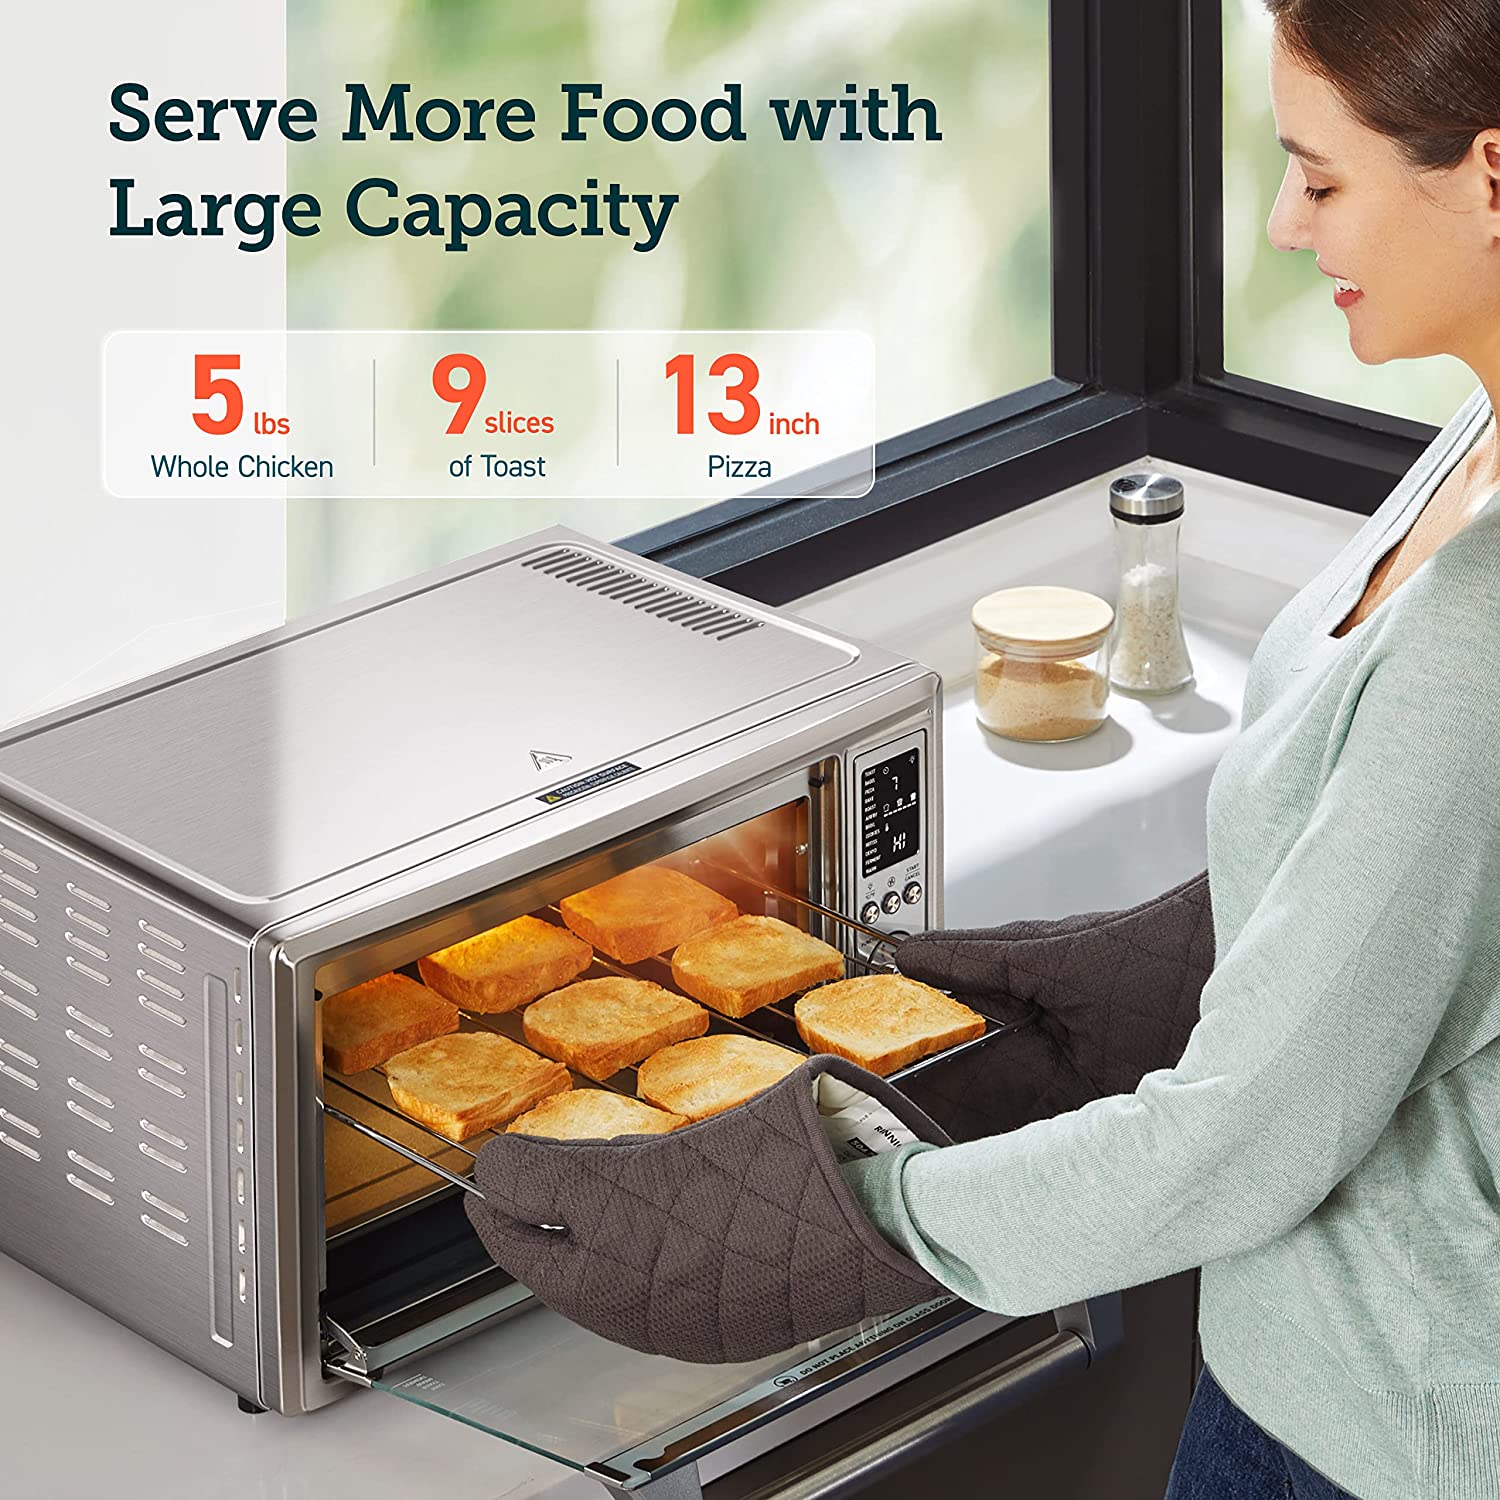 https://bigbigmart.com/wp-content/uploads/2023/06/COSORI-Air-Fryer-Toaster-Oven-12-in-1-Convection-Oven-Countertop-with-Rotisserie-Stainless-Steel-32QT-32L-6-Slice-Toast-13-inch-Pizza100-Recipes-Basket-Tray6-AccessoriesIncluded-CO130-AO4.jpg